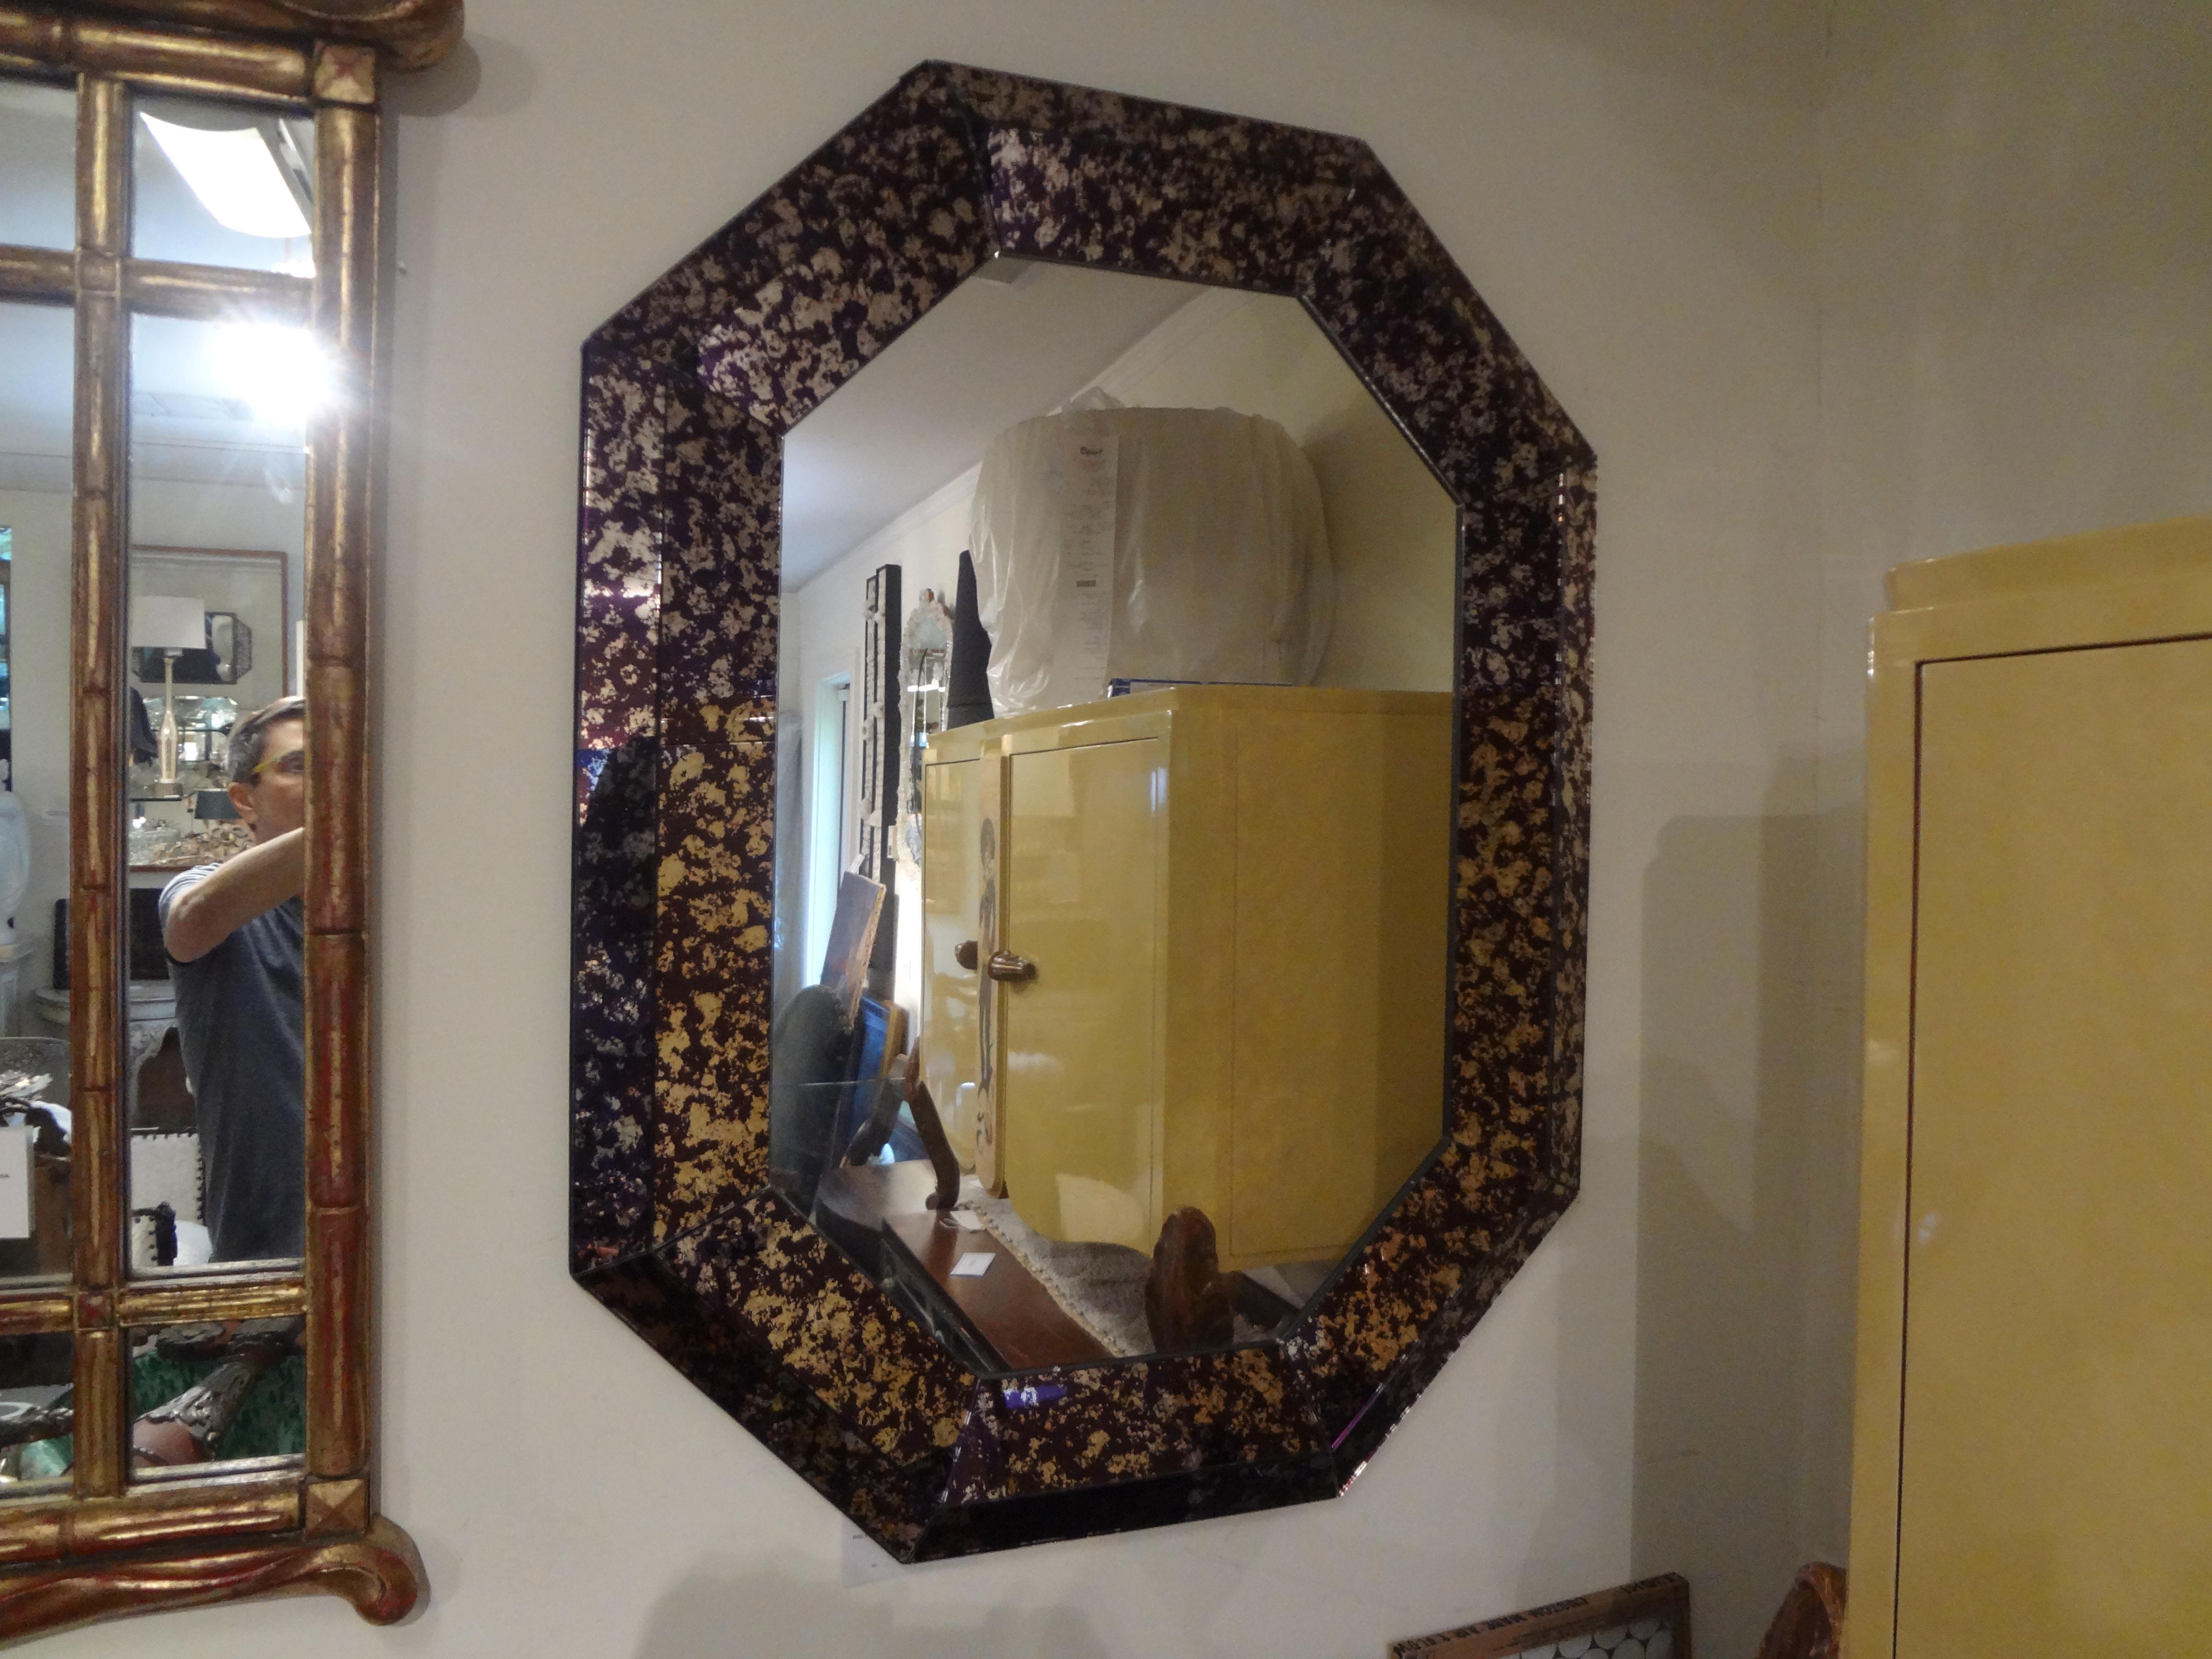 Stunning and unusual Hollywood Regency purple octagonal mirror. This beautiful midcentury mirror has a purple and silver geometric cushion perimeter surrounding a silver plate central mirror. Can be displayed vertically or horizontally.